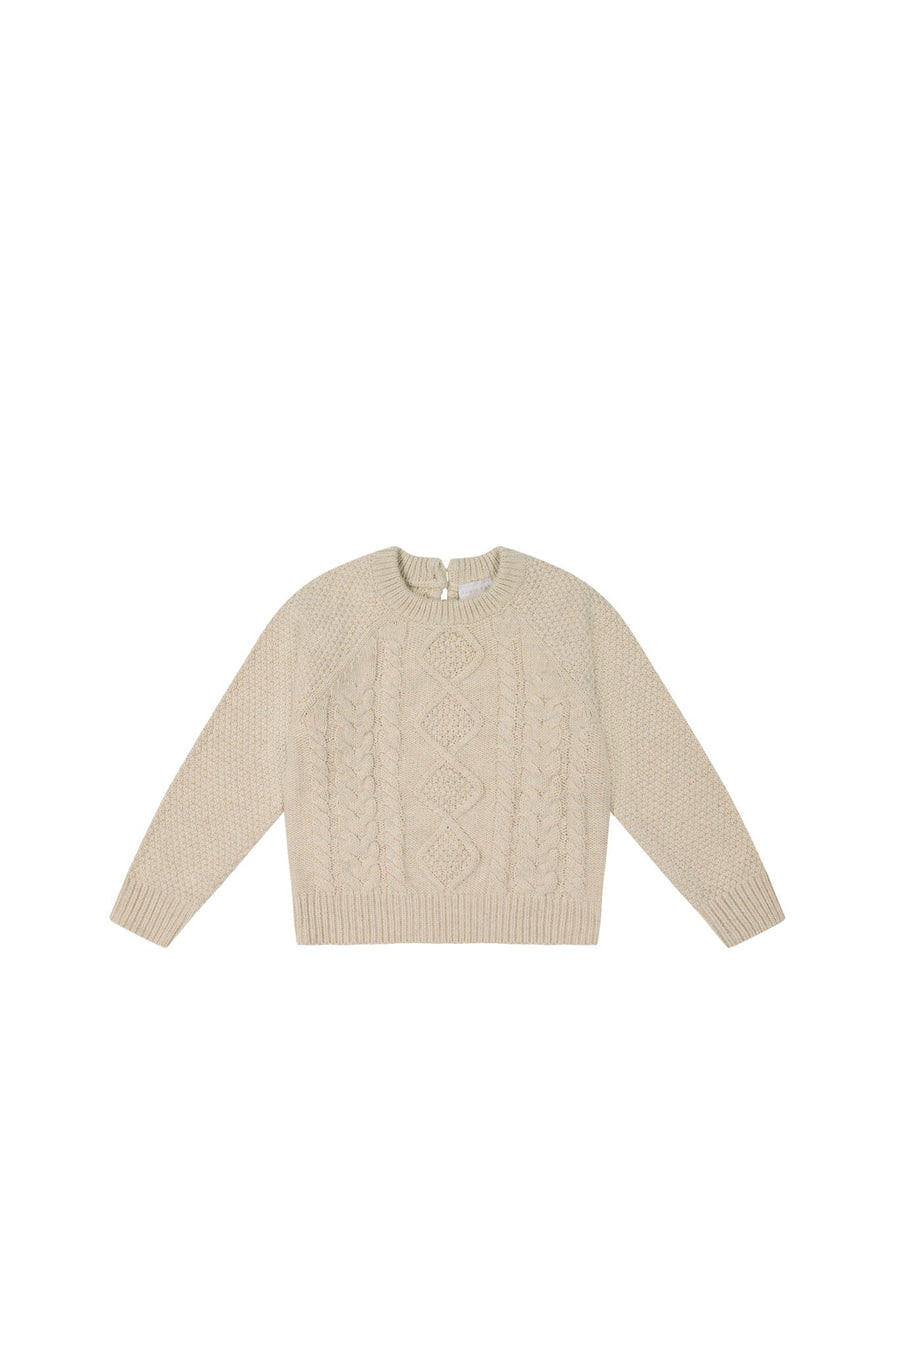 Carter Jumper - Oatmeal Marle Childrens Jumper from Jamie Kay USA